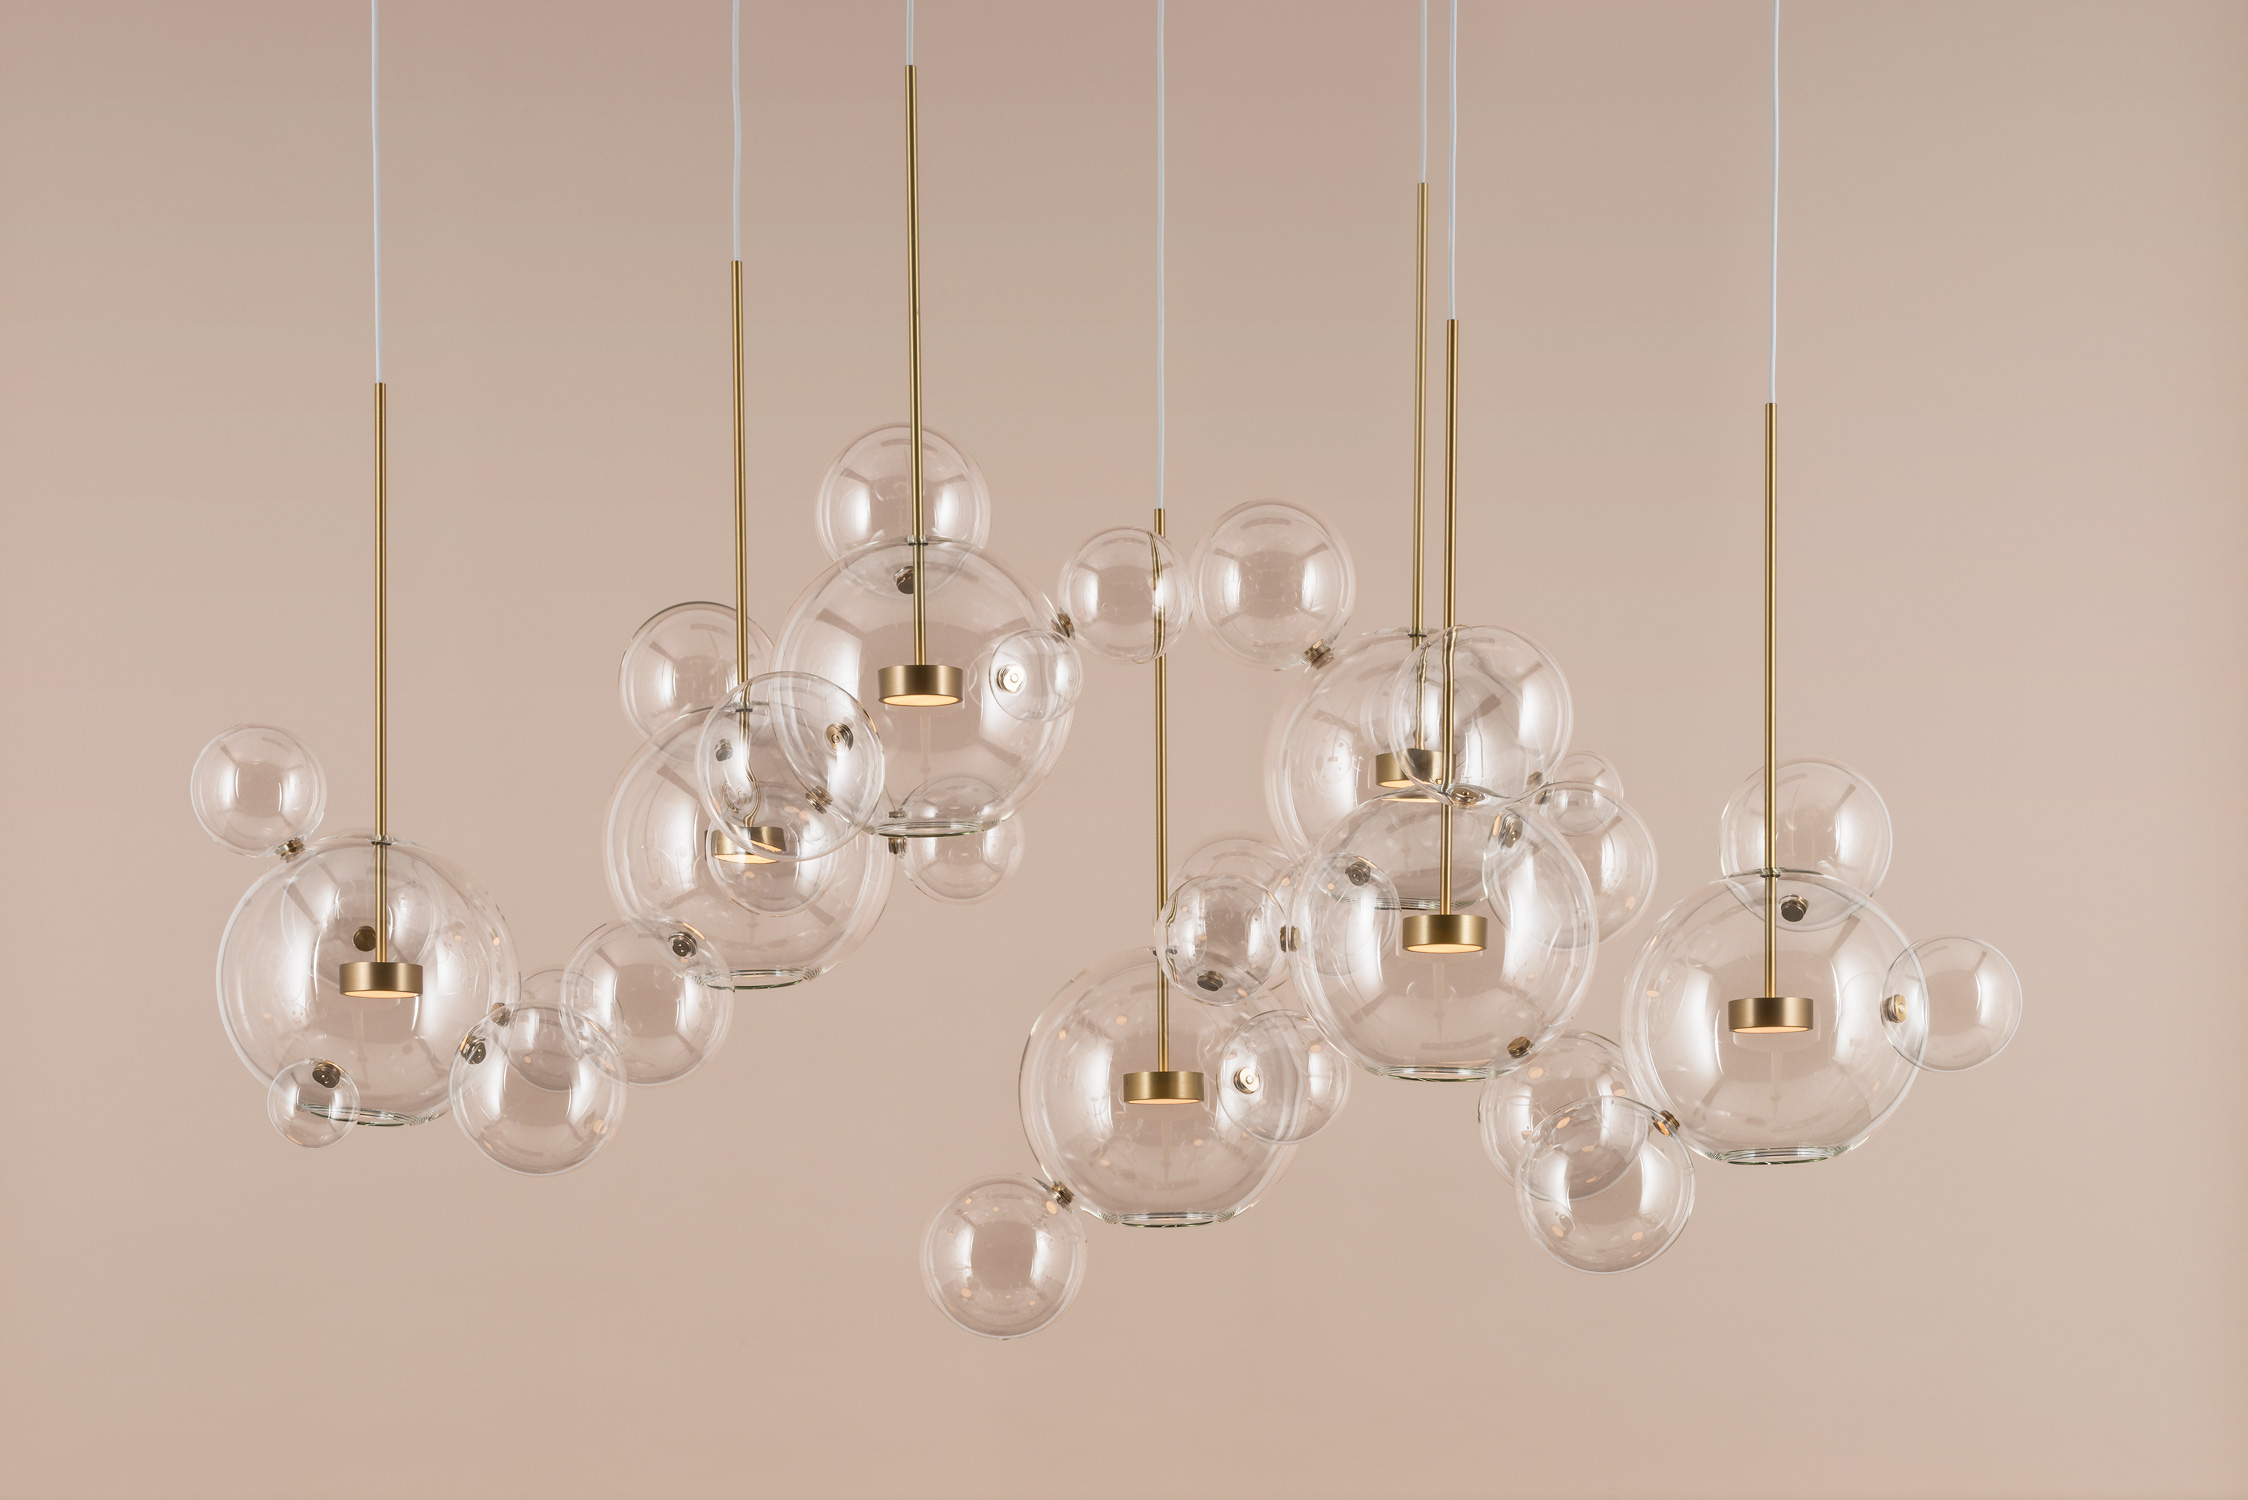 Giopato_Coombes_Bolle_Zigzag_Chandelier_34_Bubbles_Ph_FedericoVilla.jpg